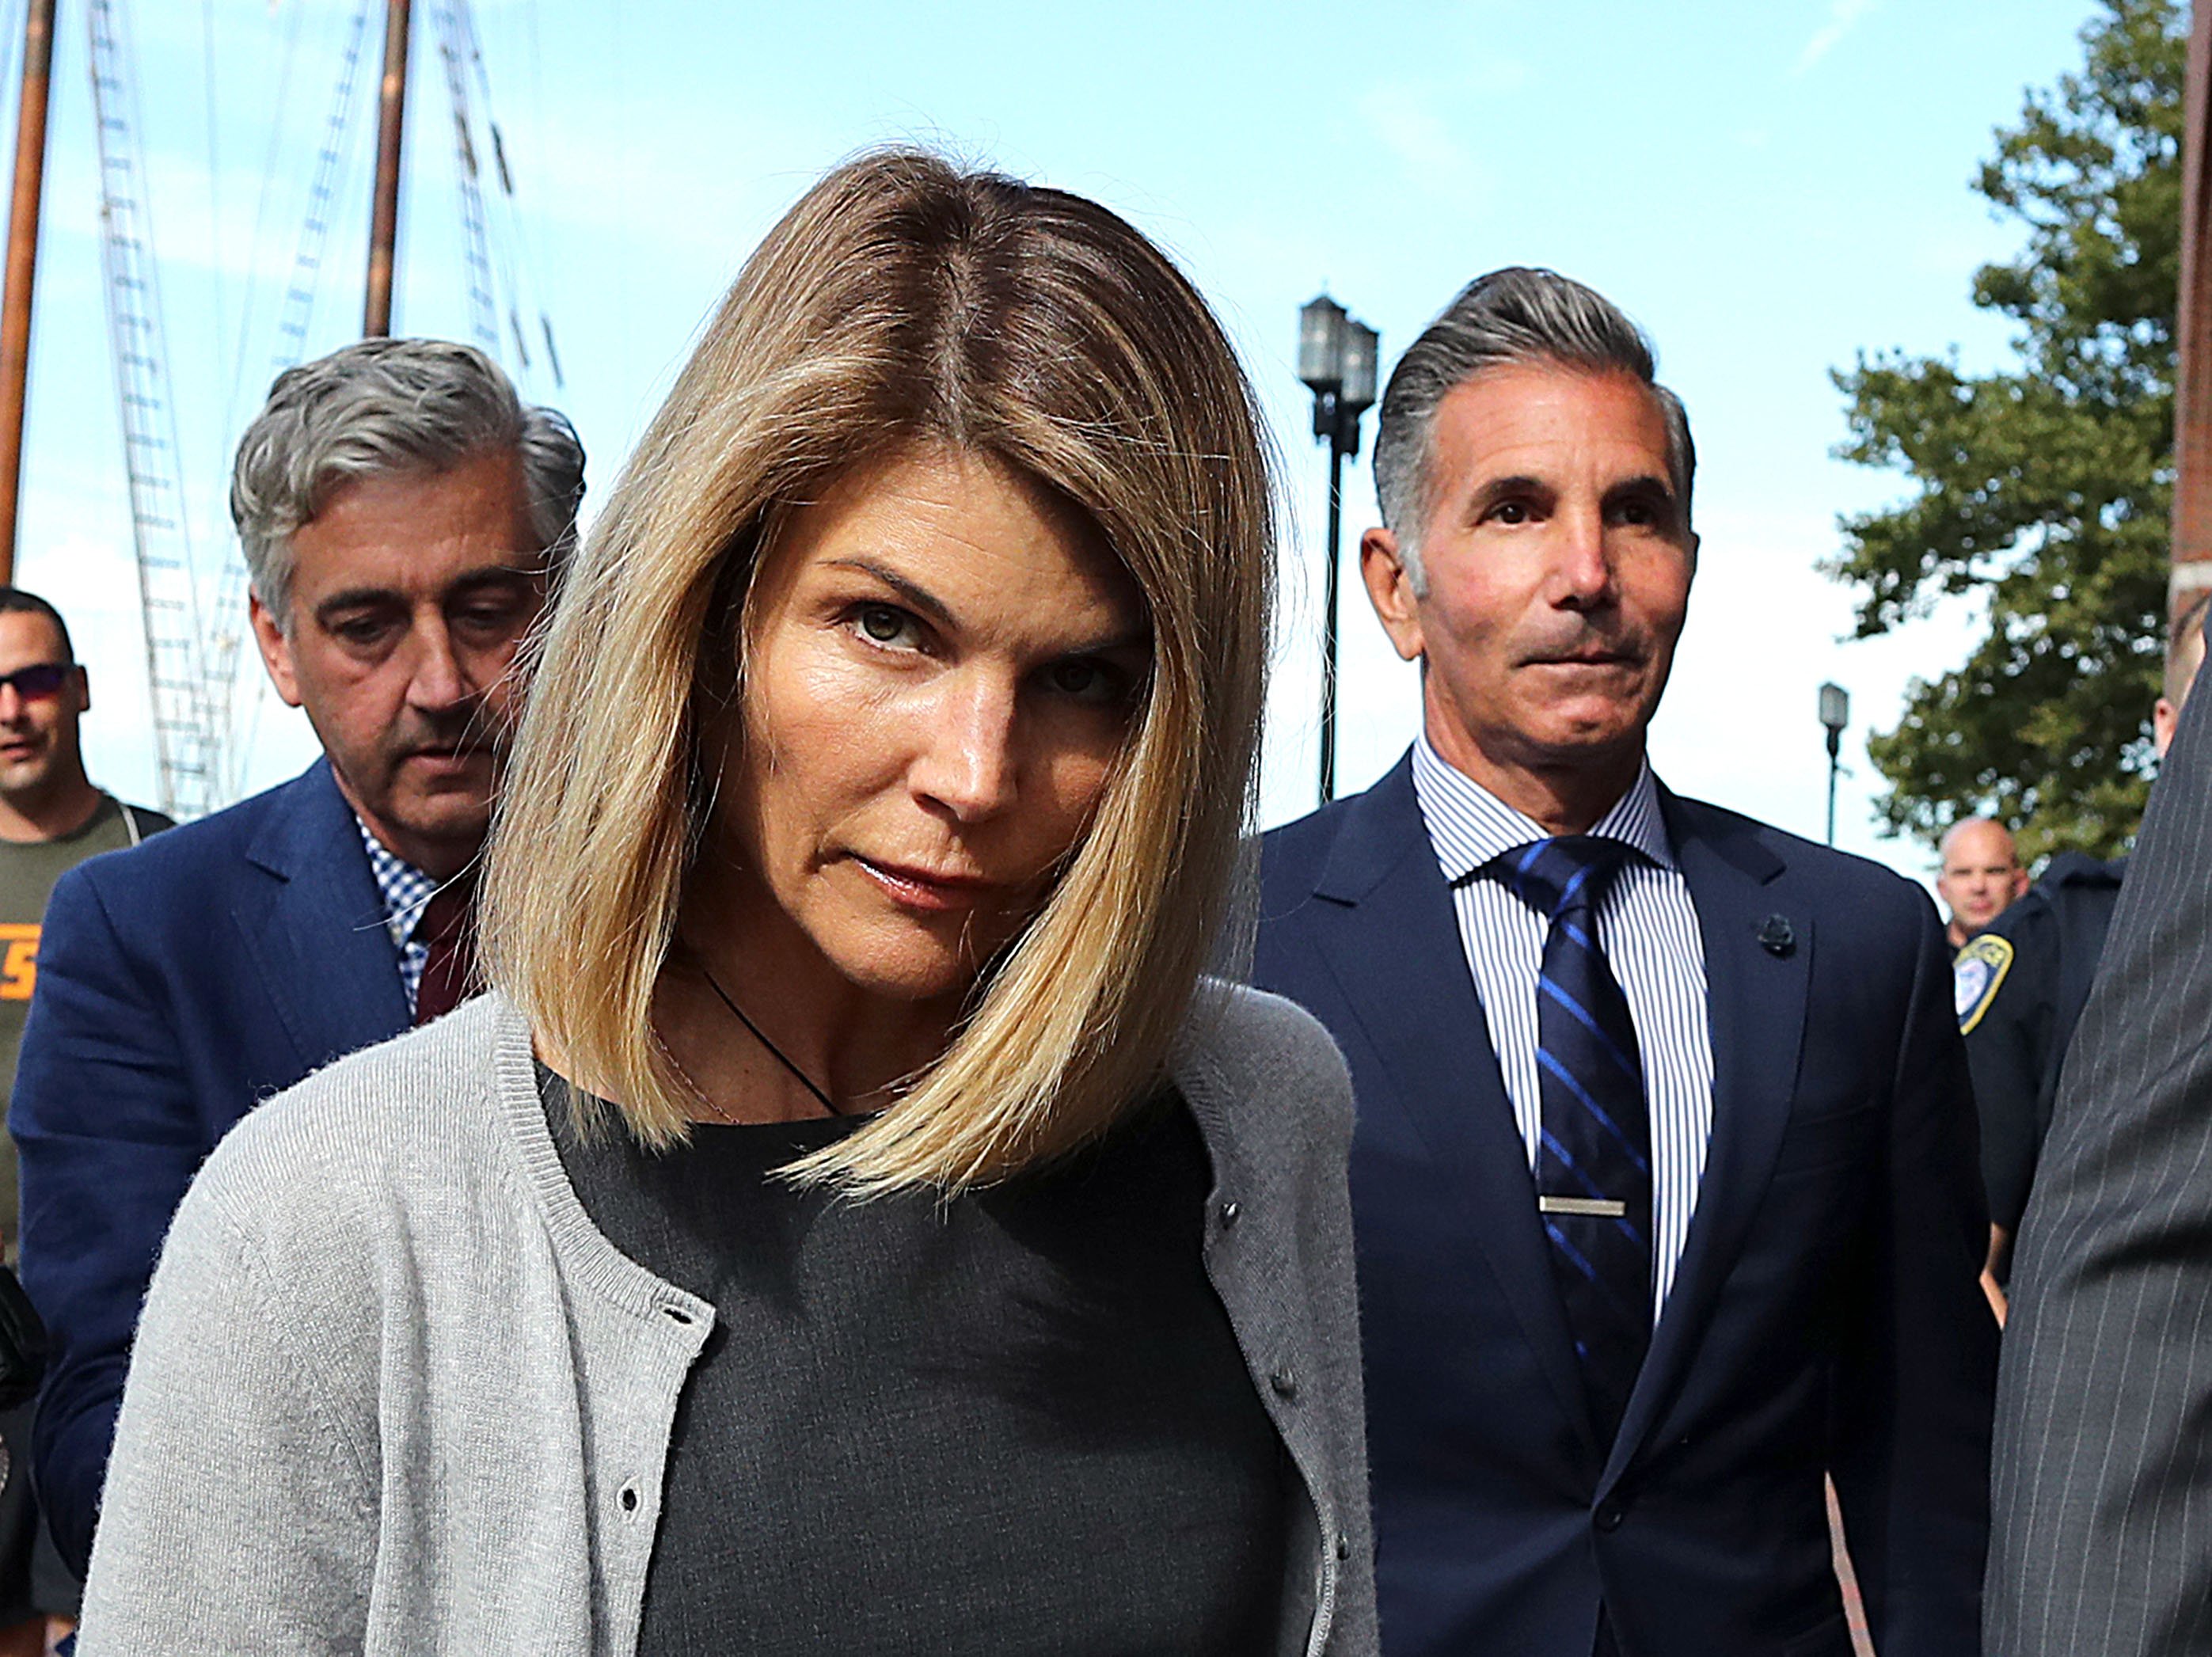 Lori Loughlin and her husband Mossimo Giannulli leave the John Joseph Moakley United States Courthouse in Boston on August. 27, 2019. | Photo: Getty Images